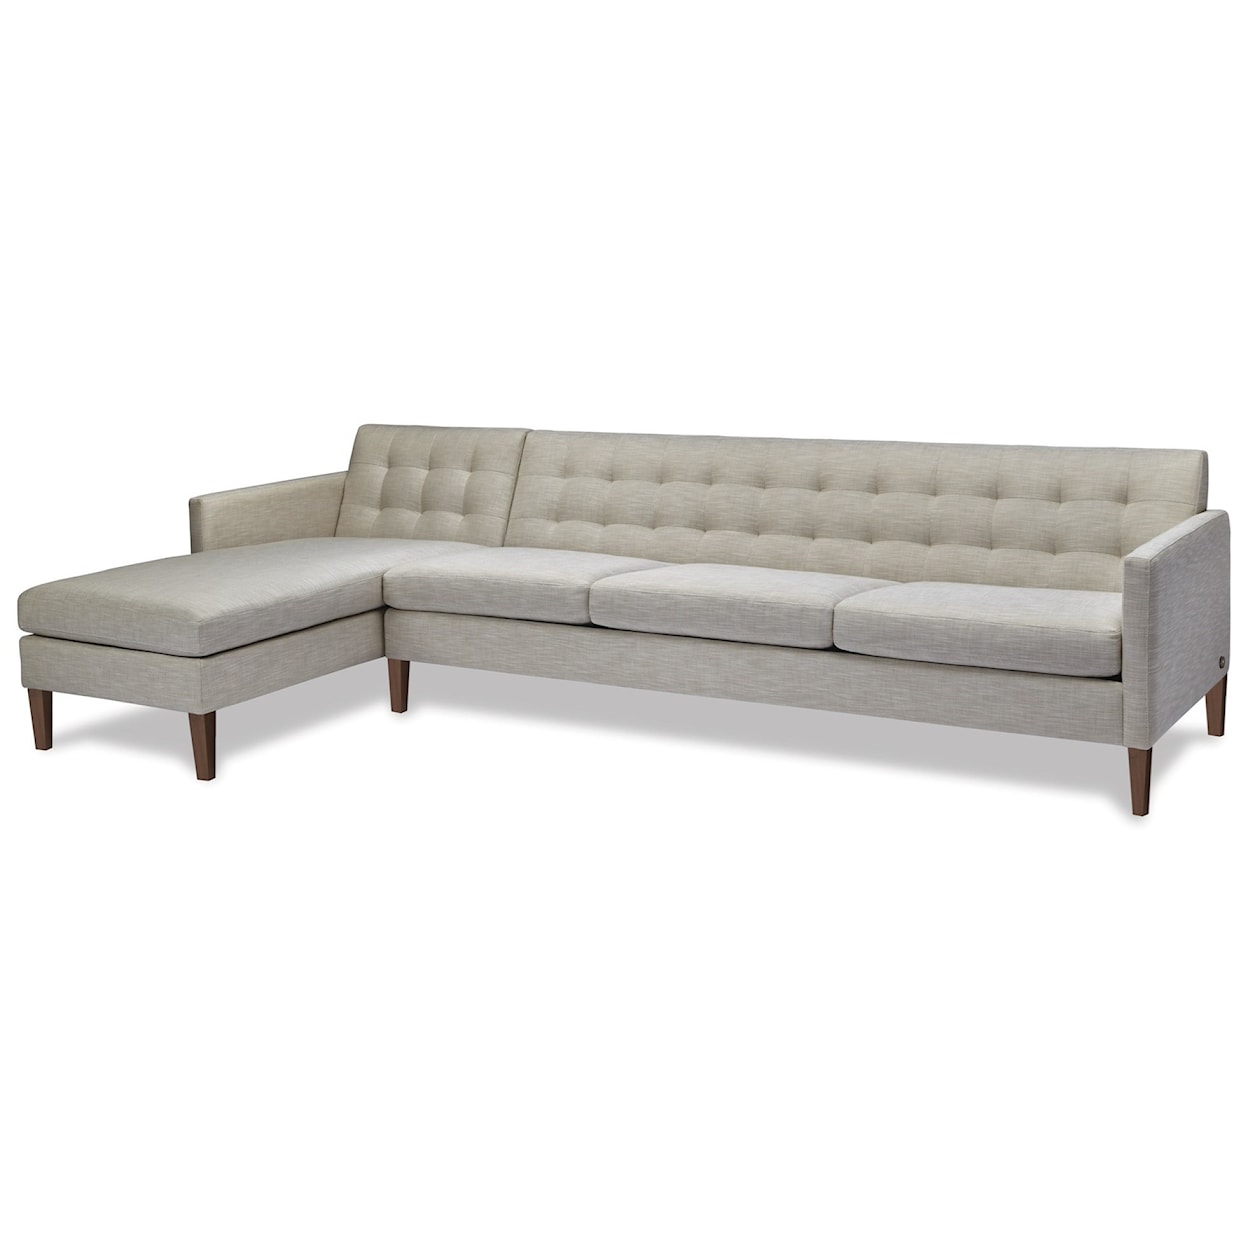 American Leather Ainsley Sofa with Chaise